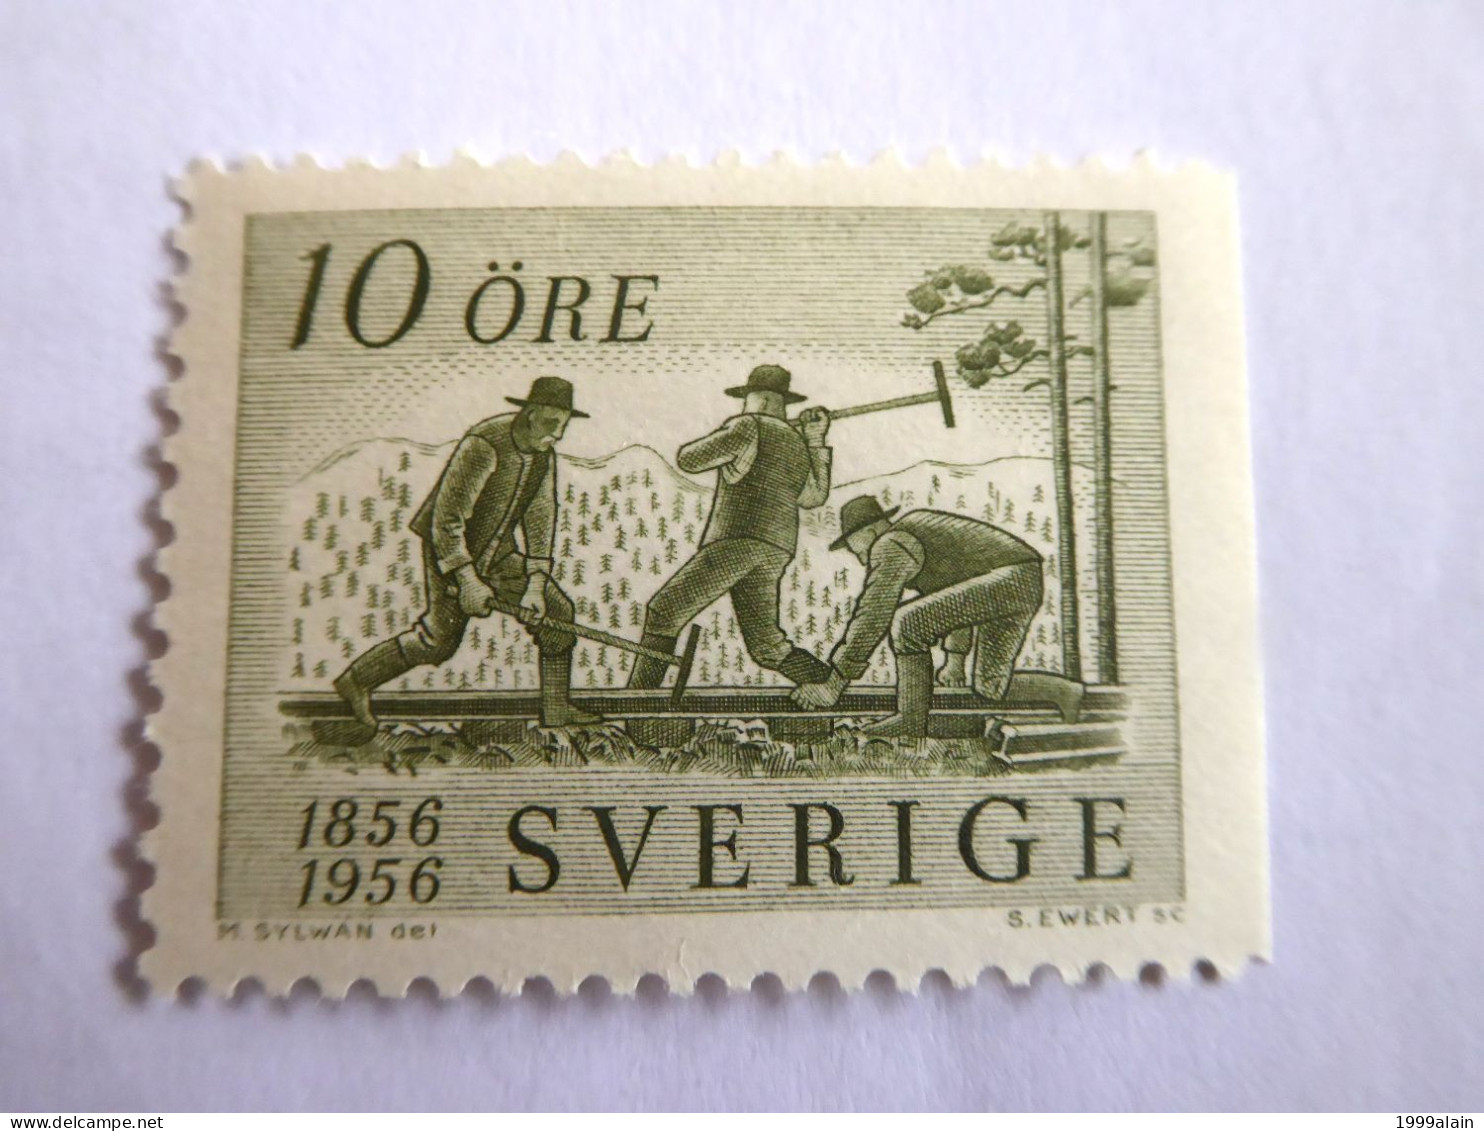 SUEDE - SWEDEN - 1956 YVERT N° 411a MNH** - Unused Stamps